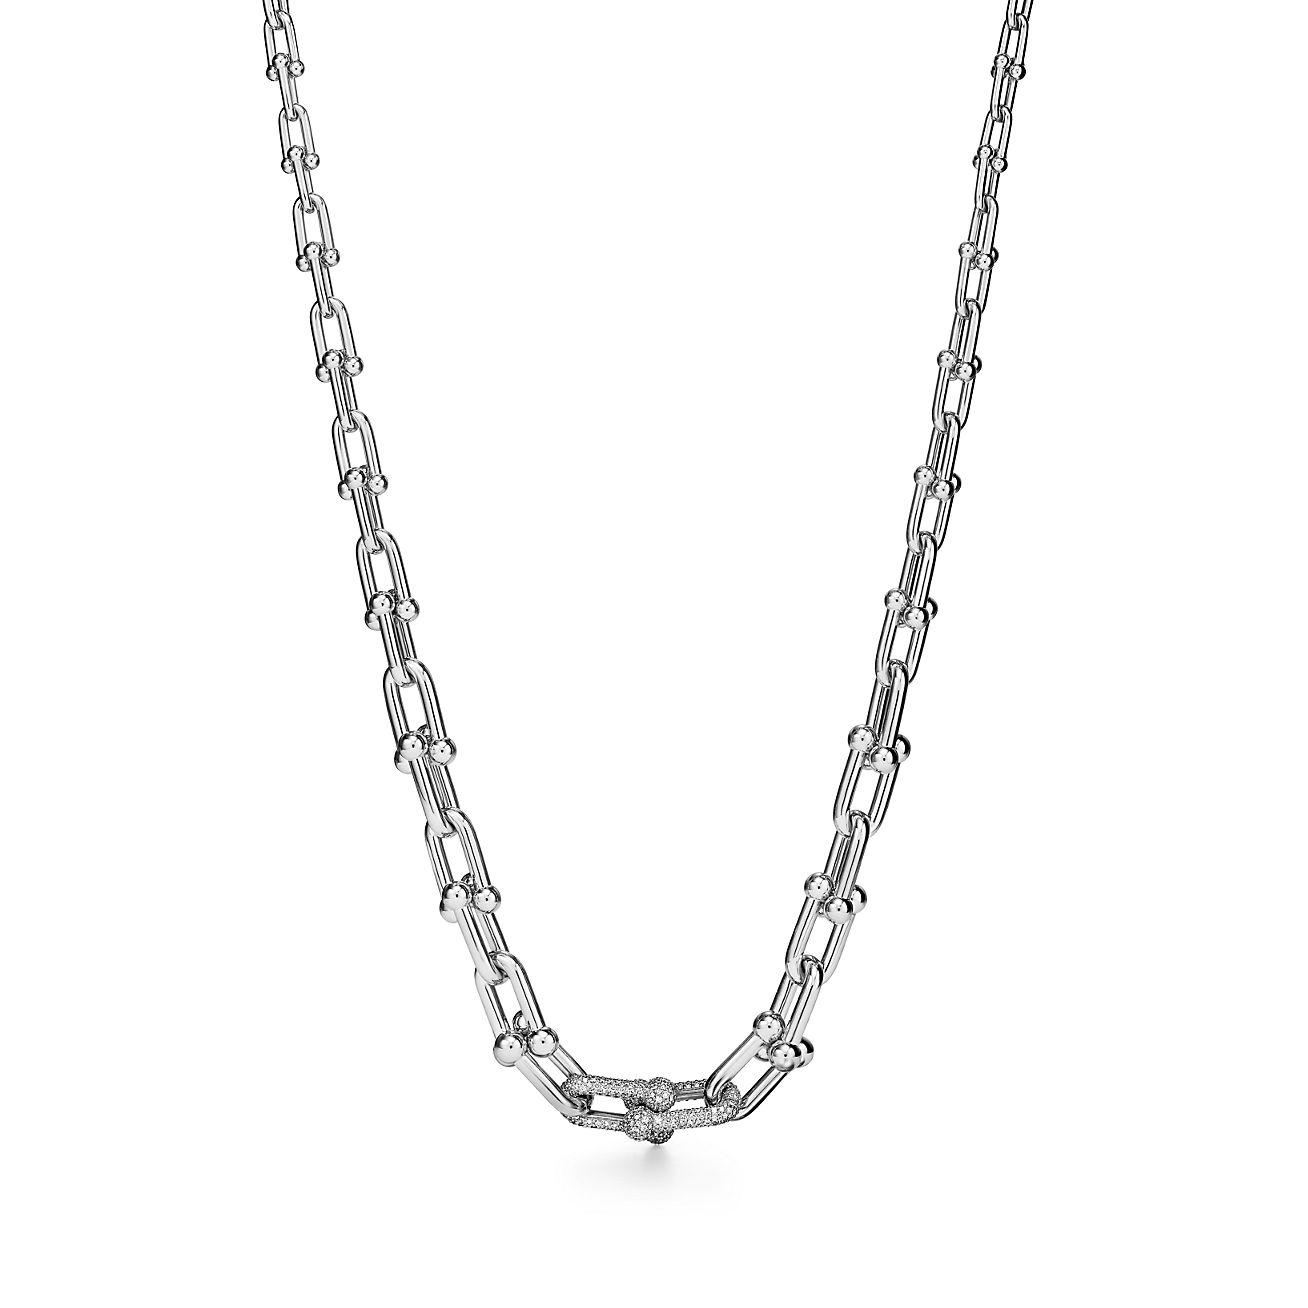 Tiffany HardWear Graduated Link Necklace in White Gold with Pavé 